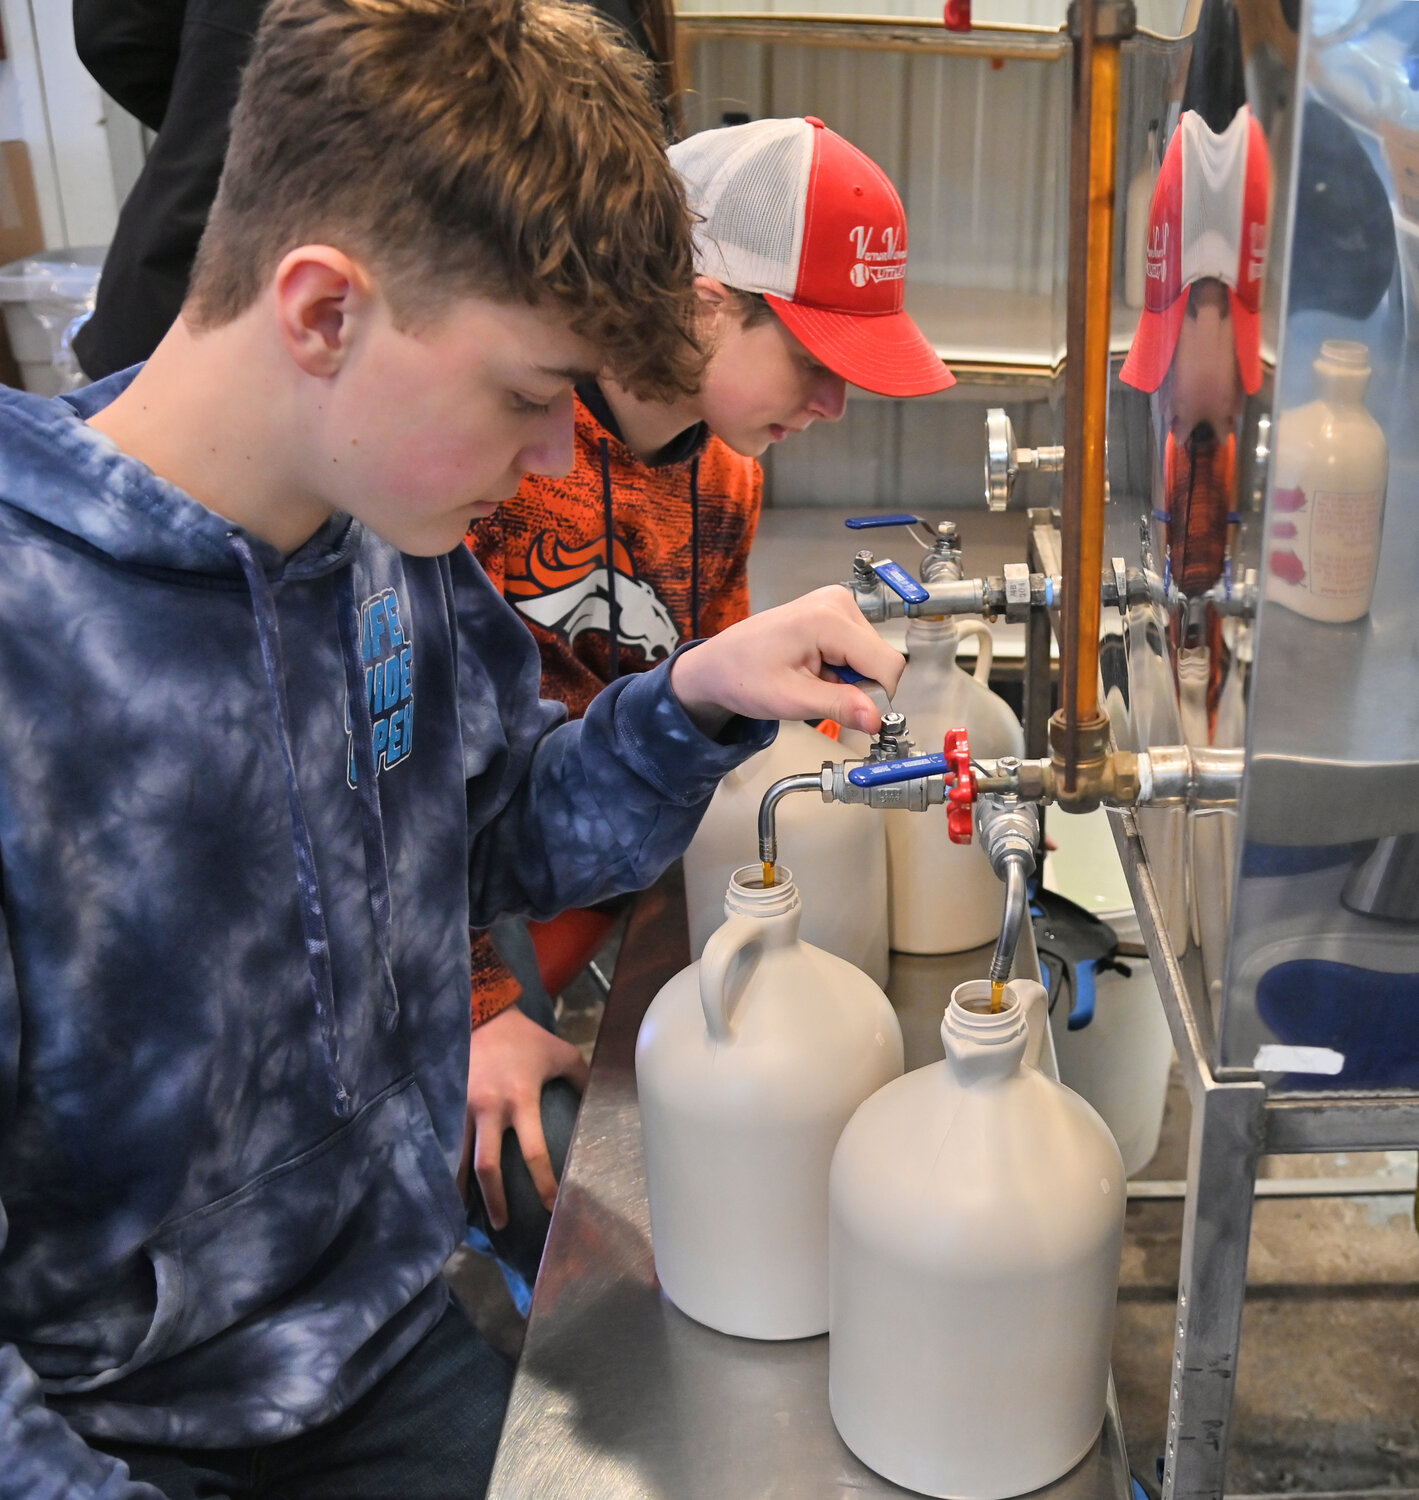 VVS junior and FFA president Devon Conley fills a gallon jug with maple syrup Friday, March 10 in their sap house in Verona. Next to him is junior Mark Hoffman.